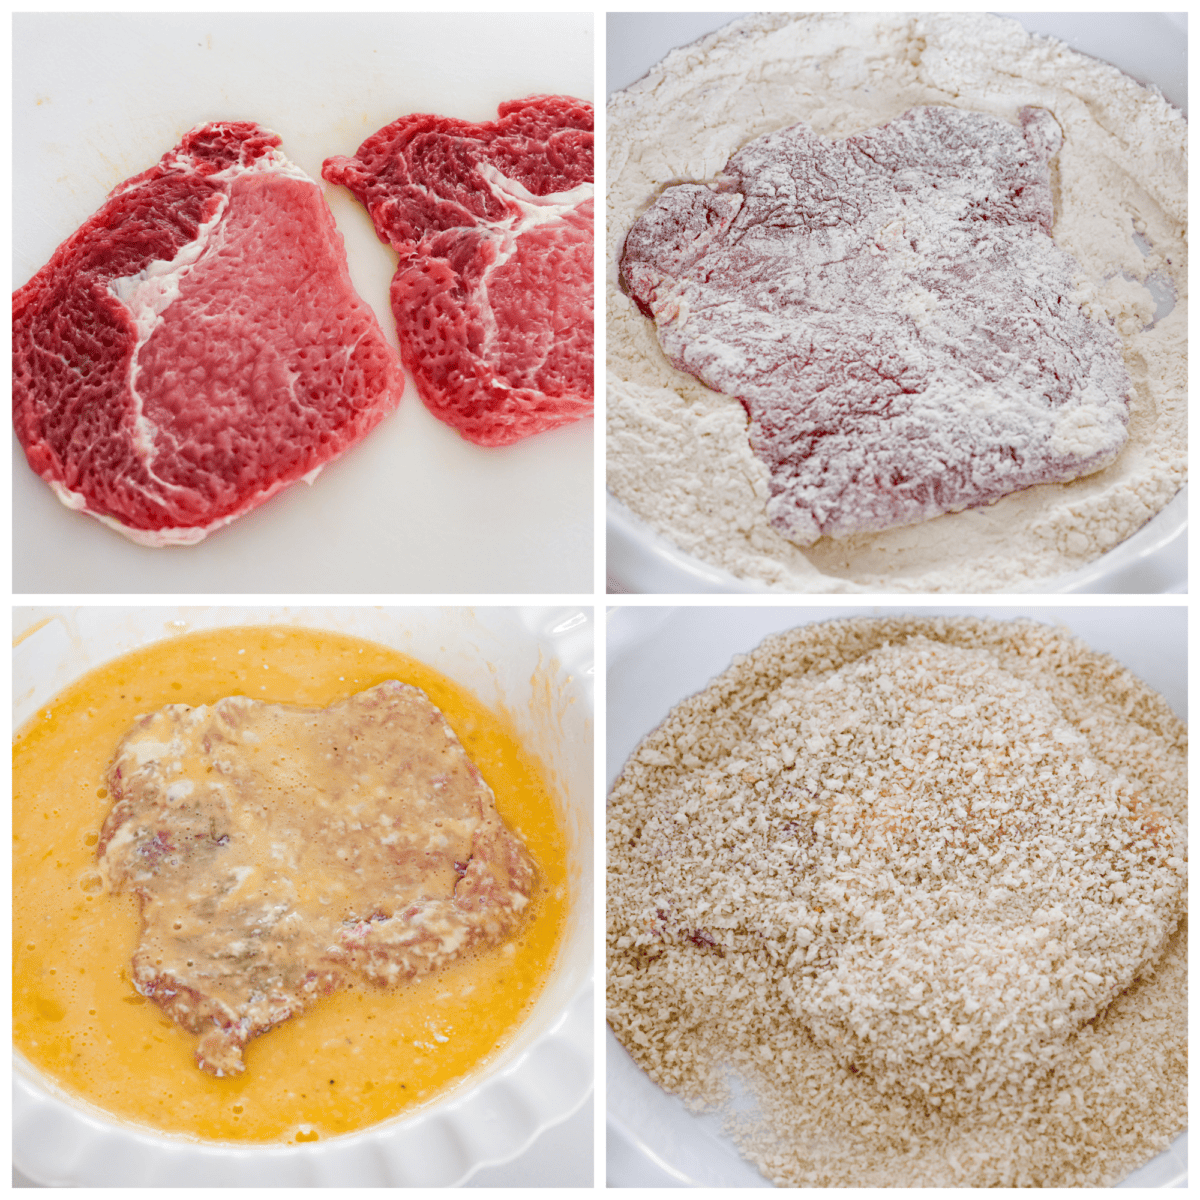 4-photo collage of the pork chops being coated in flour, egg, and panko breadcrumbs.